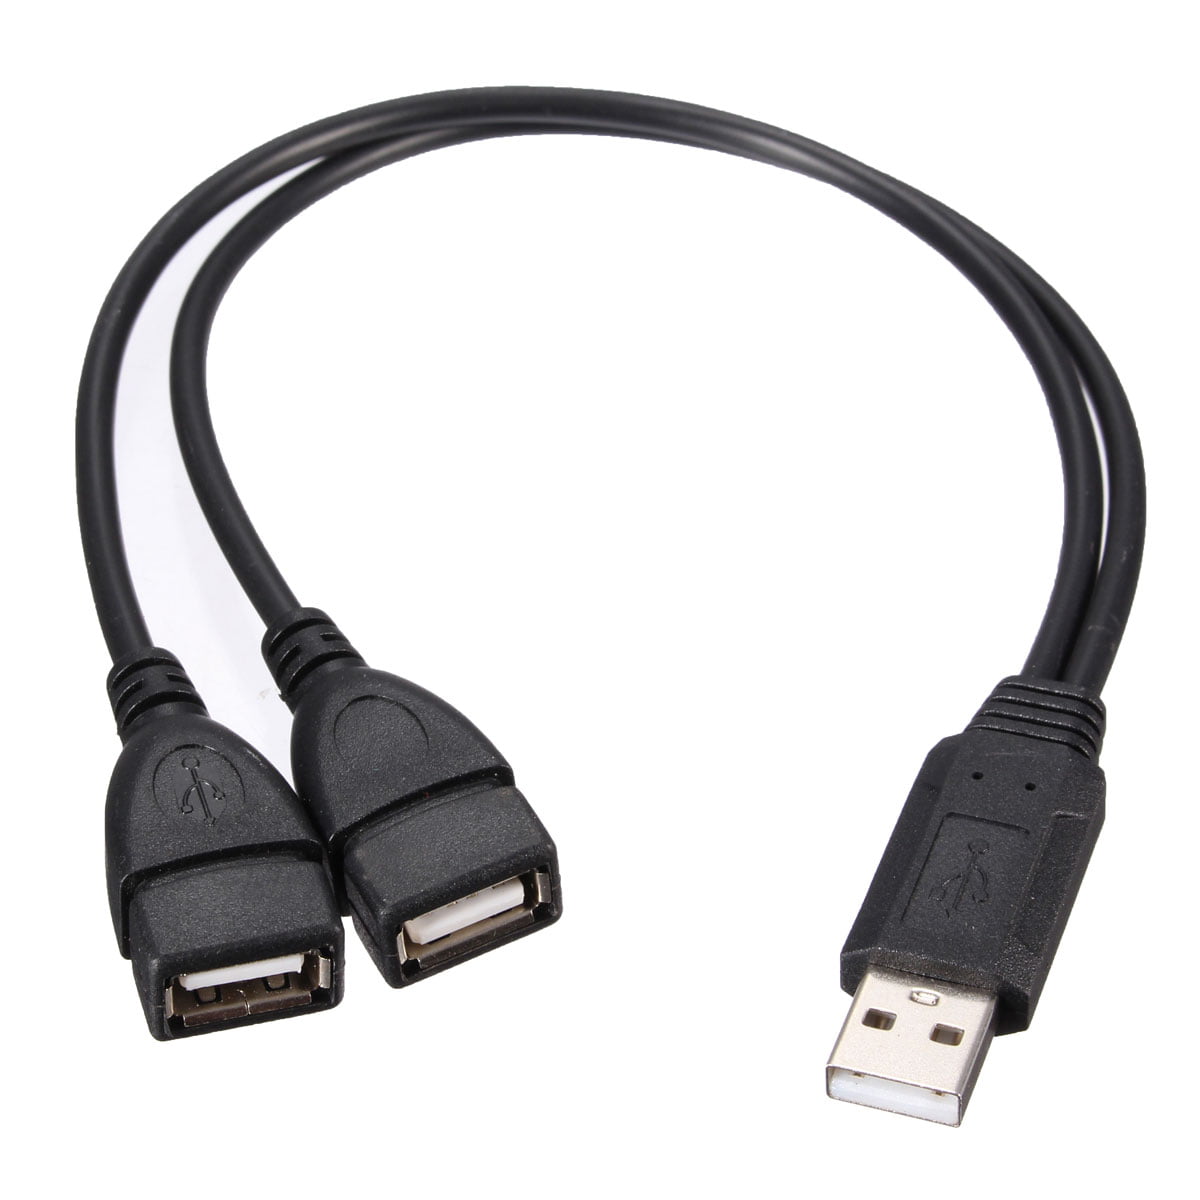 5xUSB 2.0 Male To USB Male Cord Changer Cable Coupler Adapter Convertor